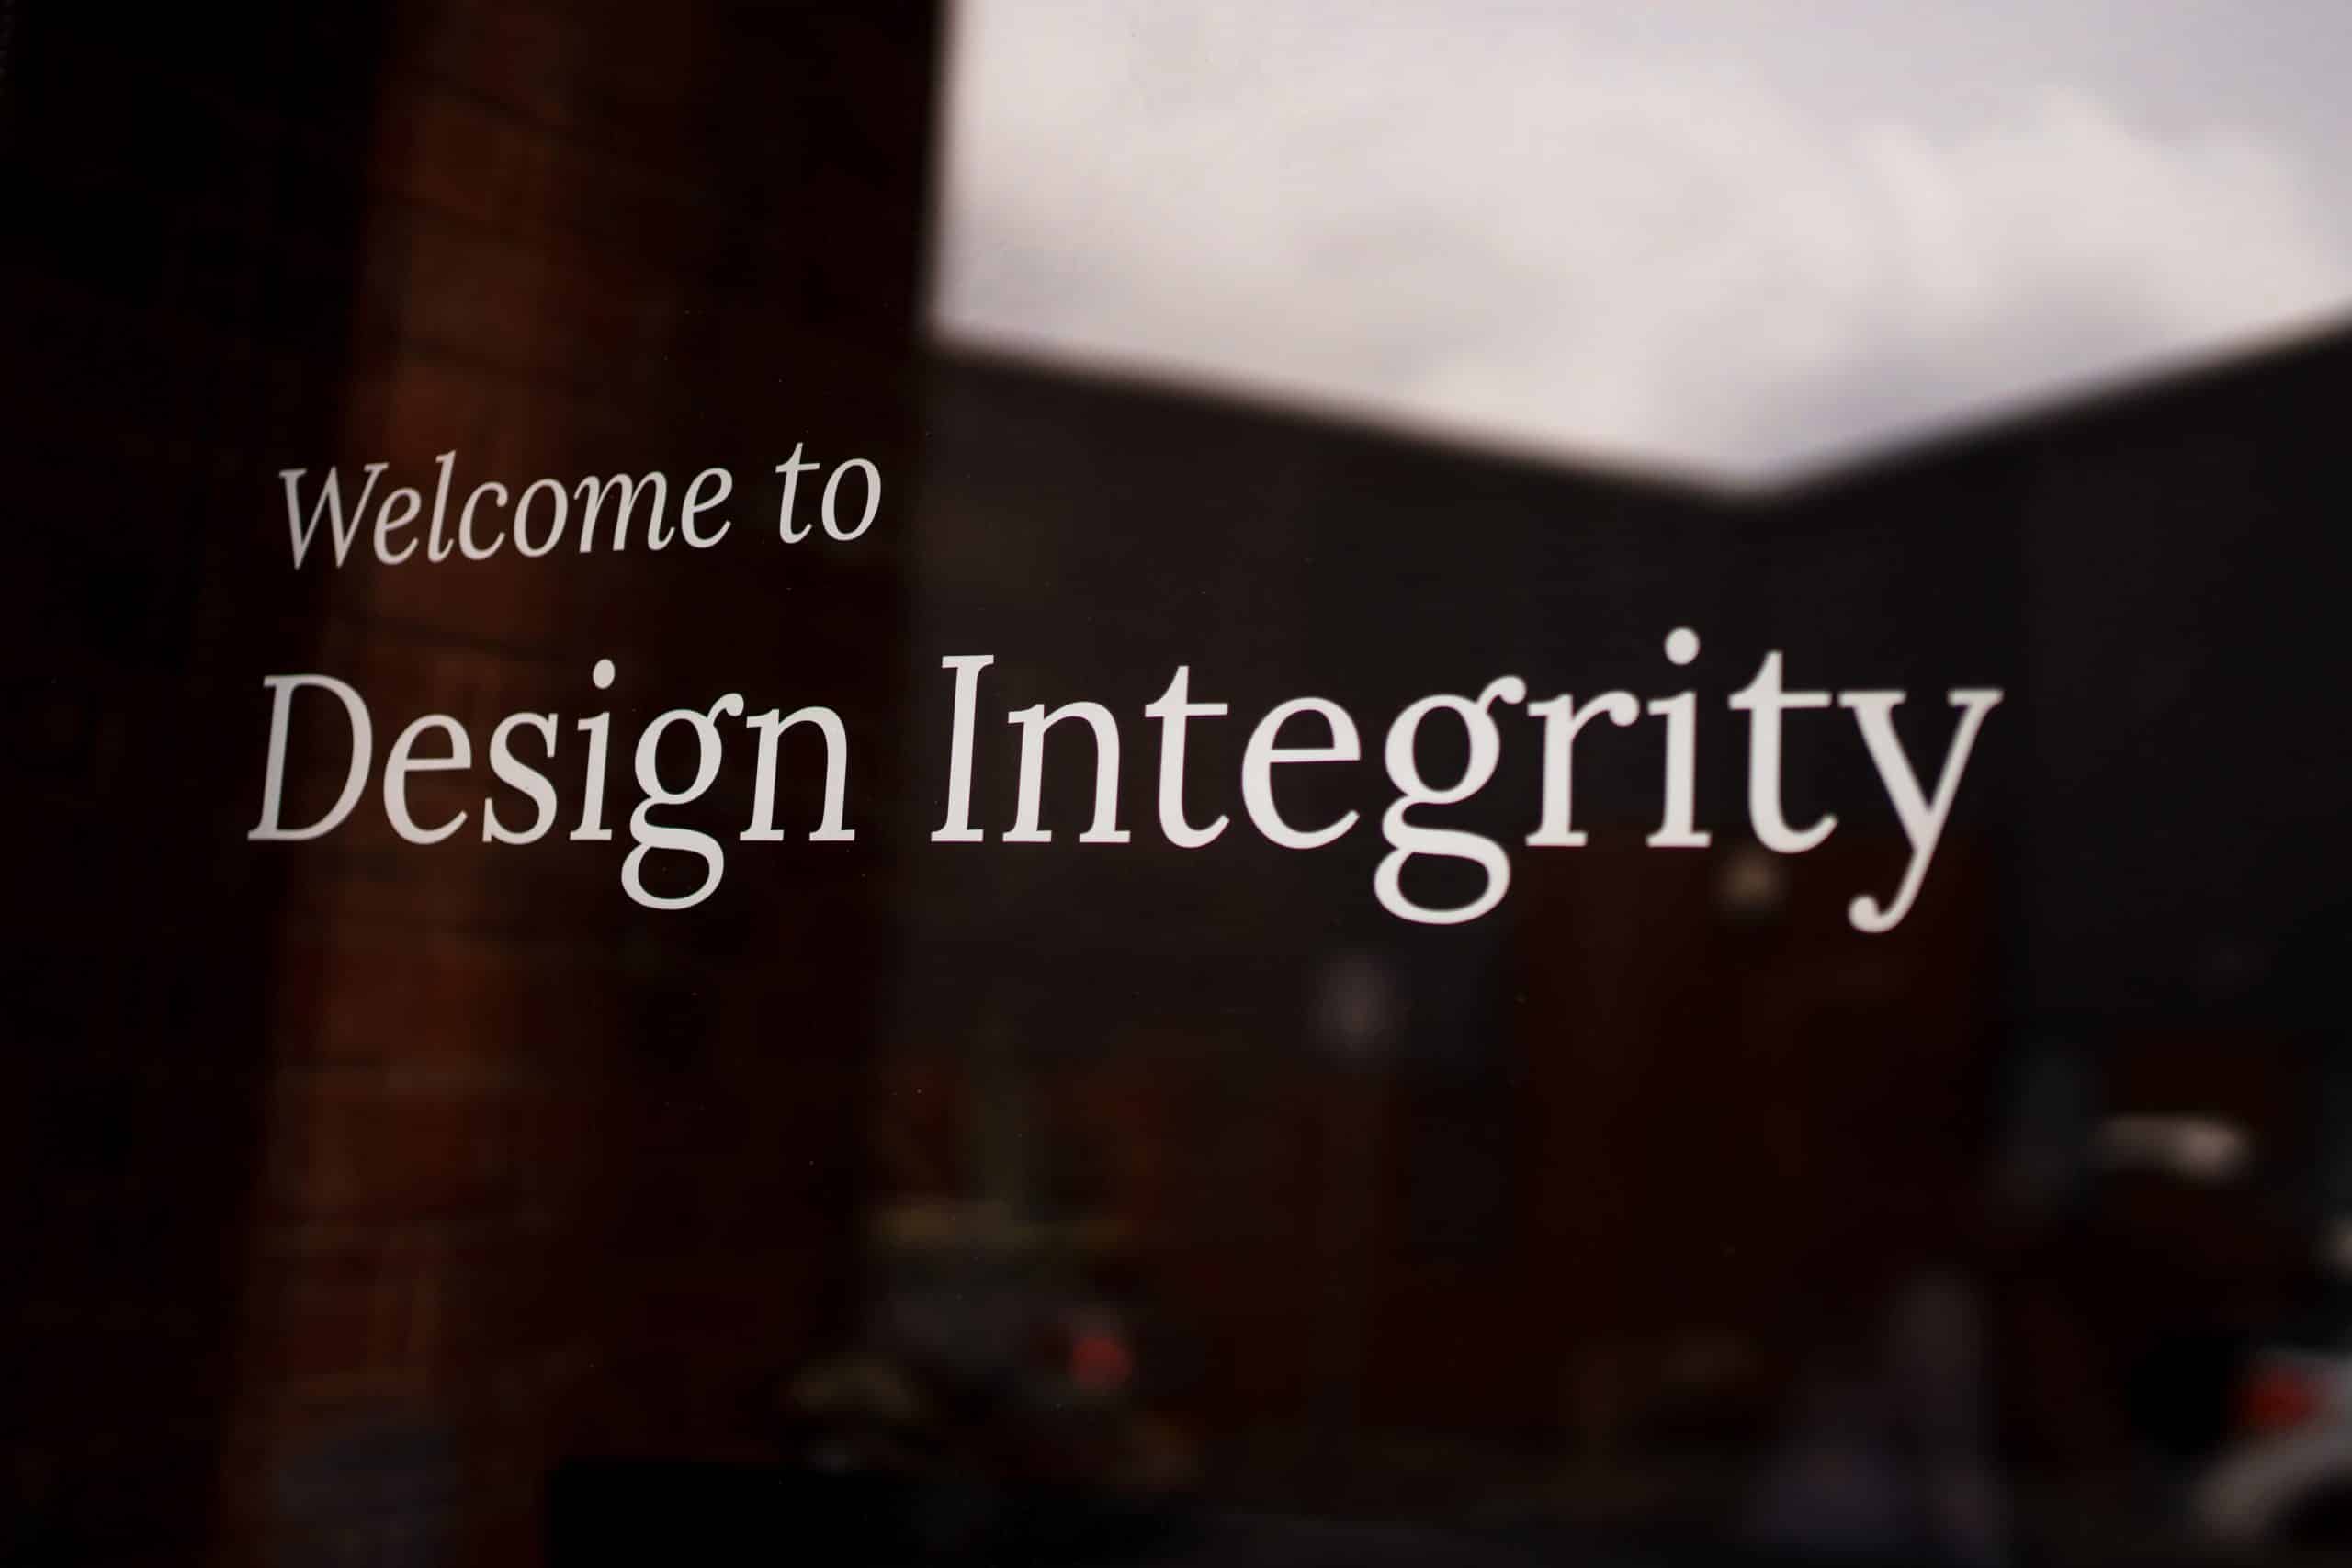 Image representing the Hopeful post, The Story Of How Design Integrity Became Hopeful.